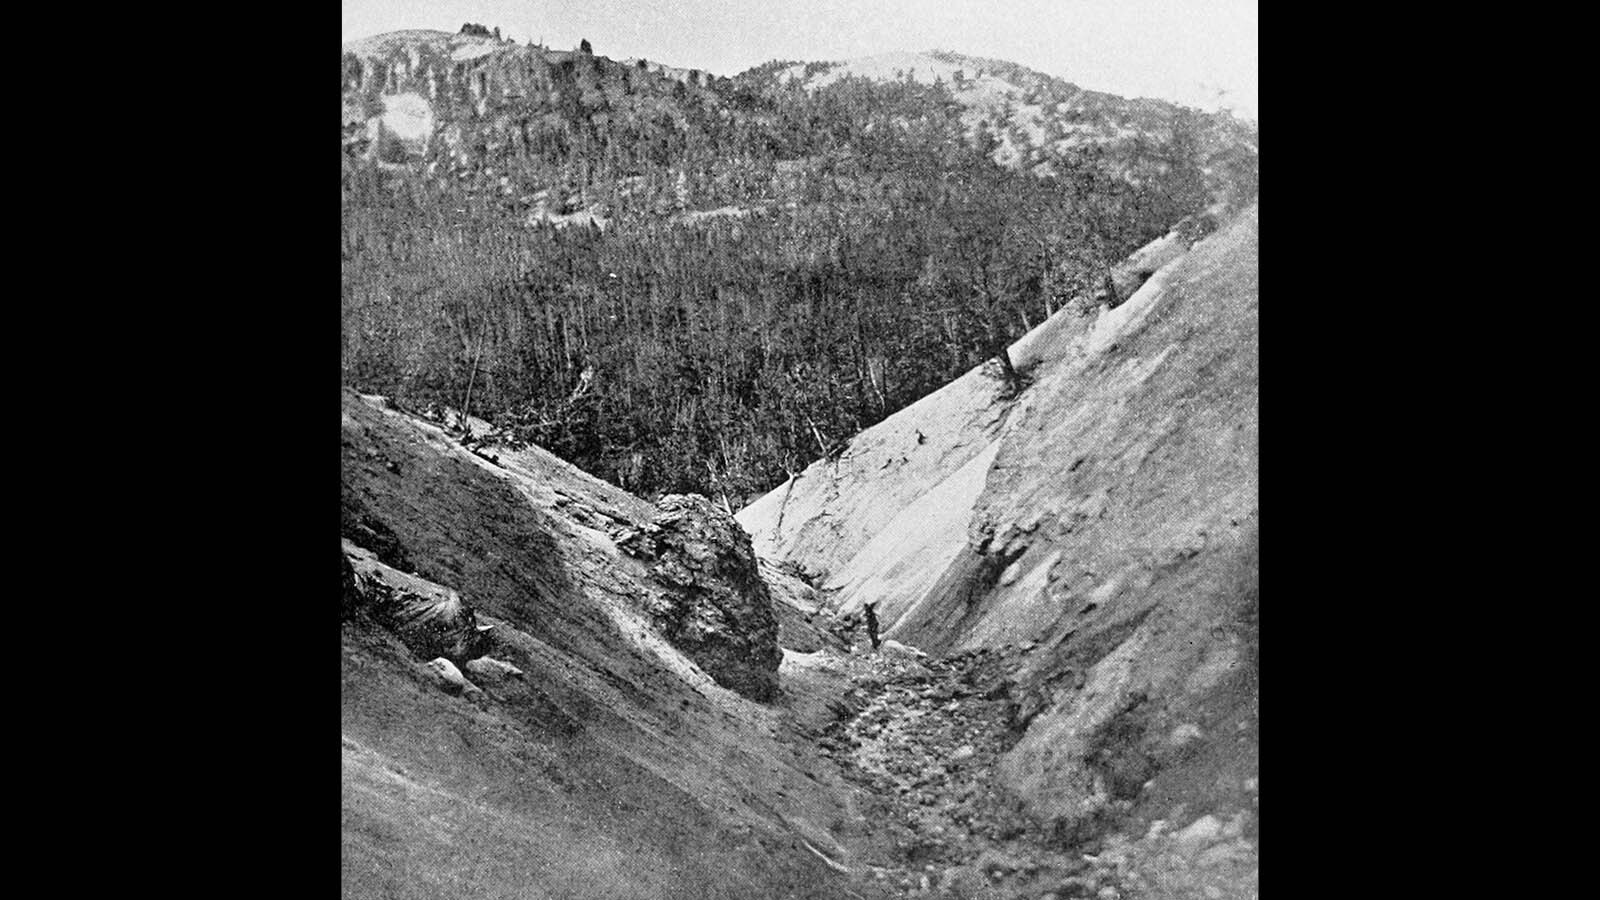 The lower part of Death Gulch in Yellowstone in 1897.